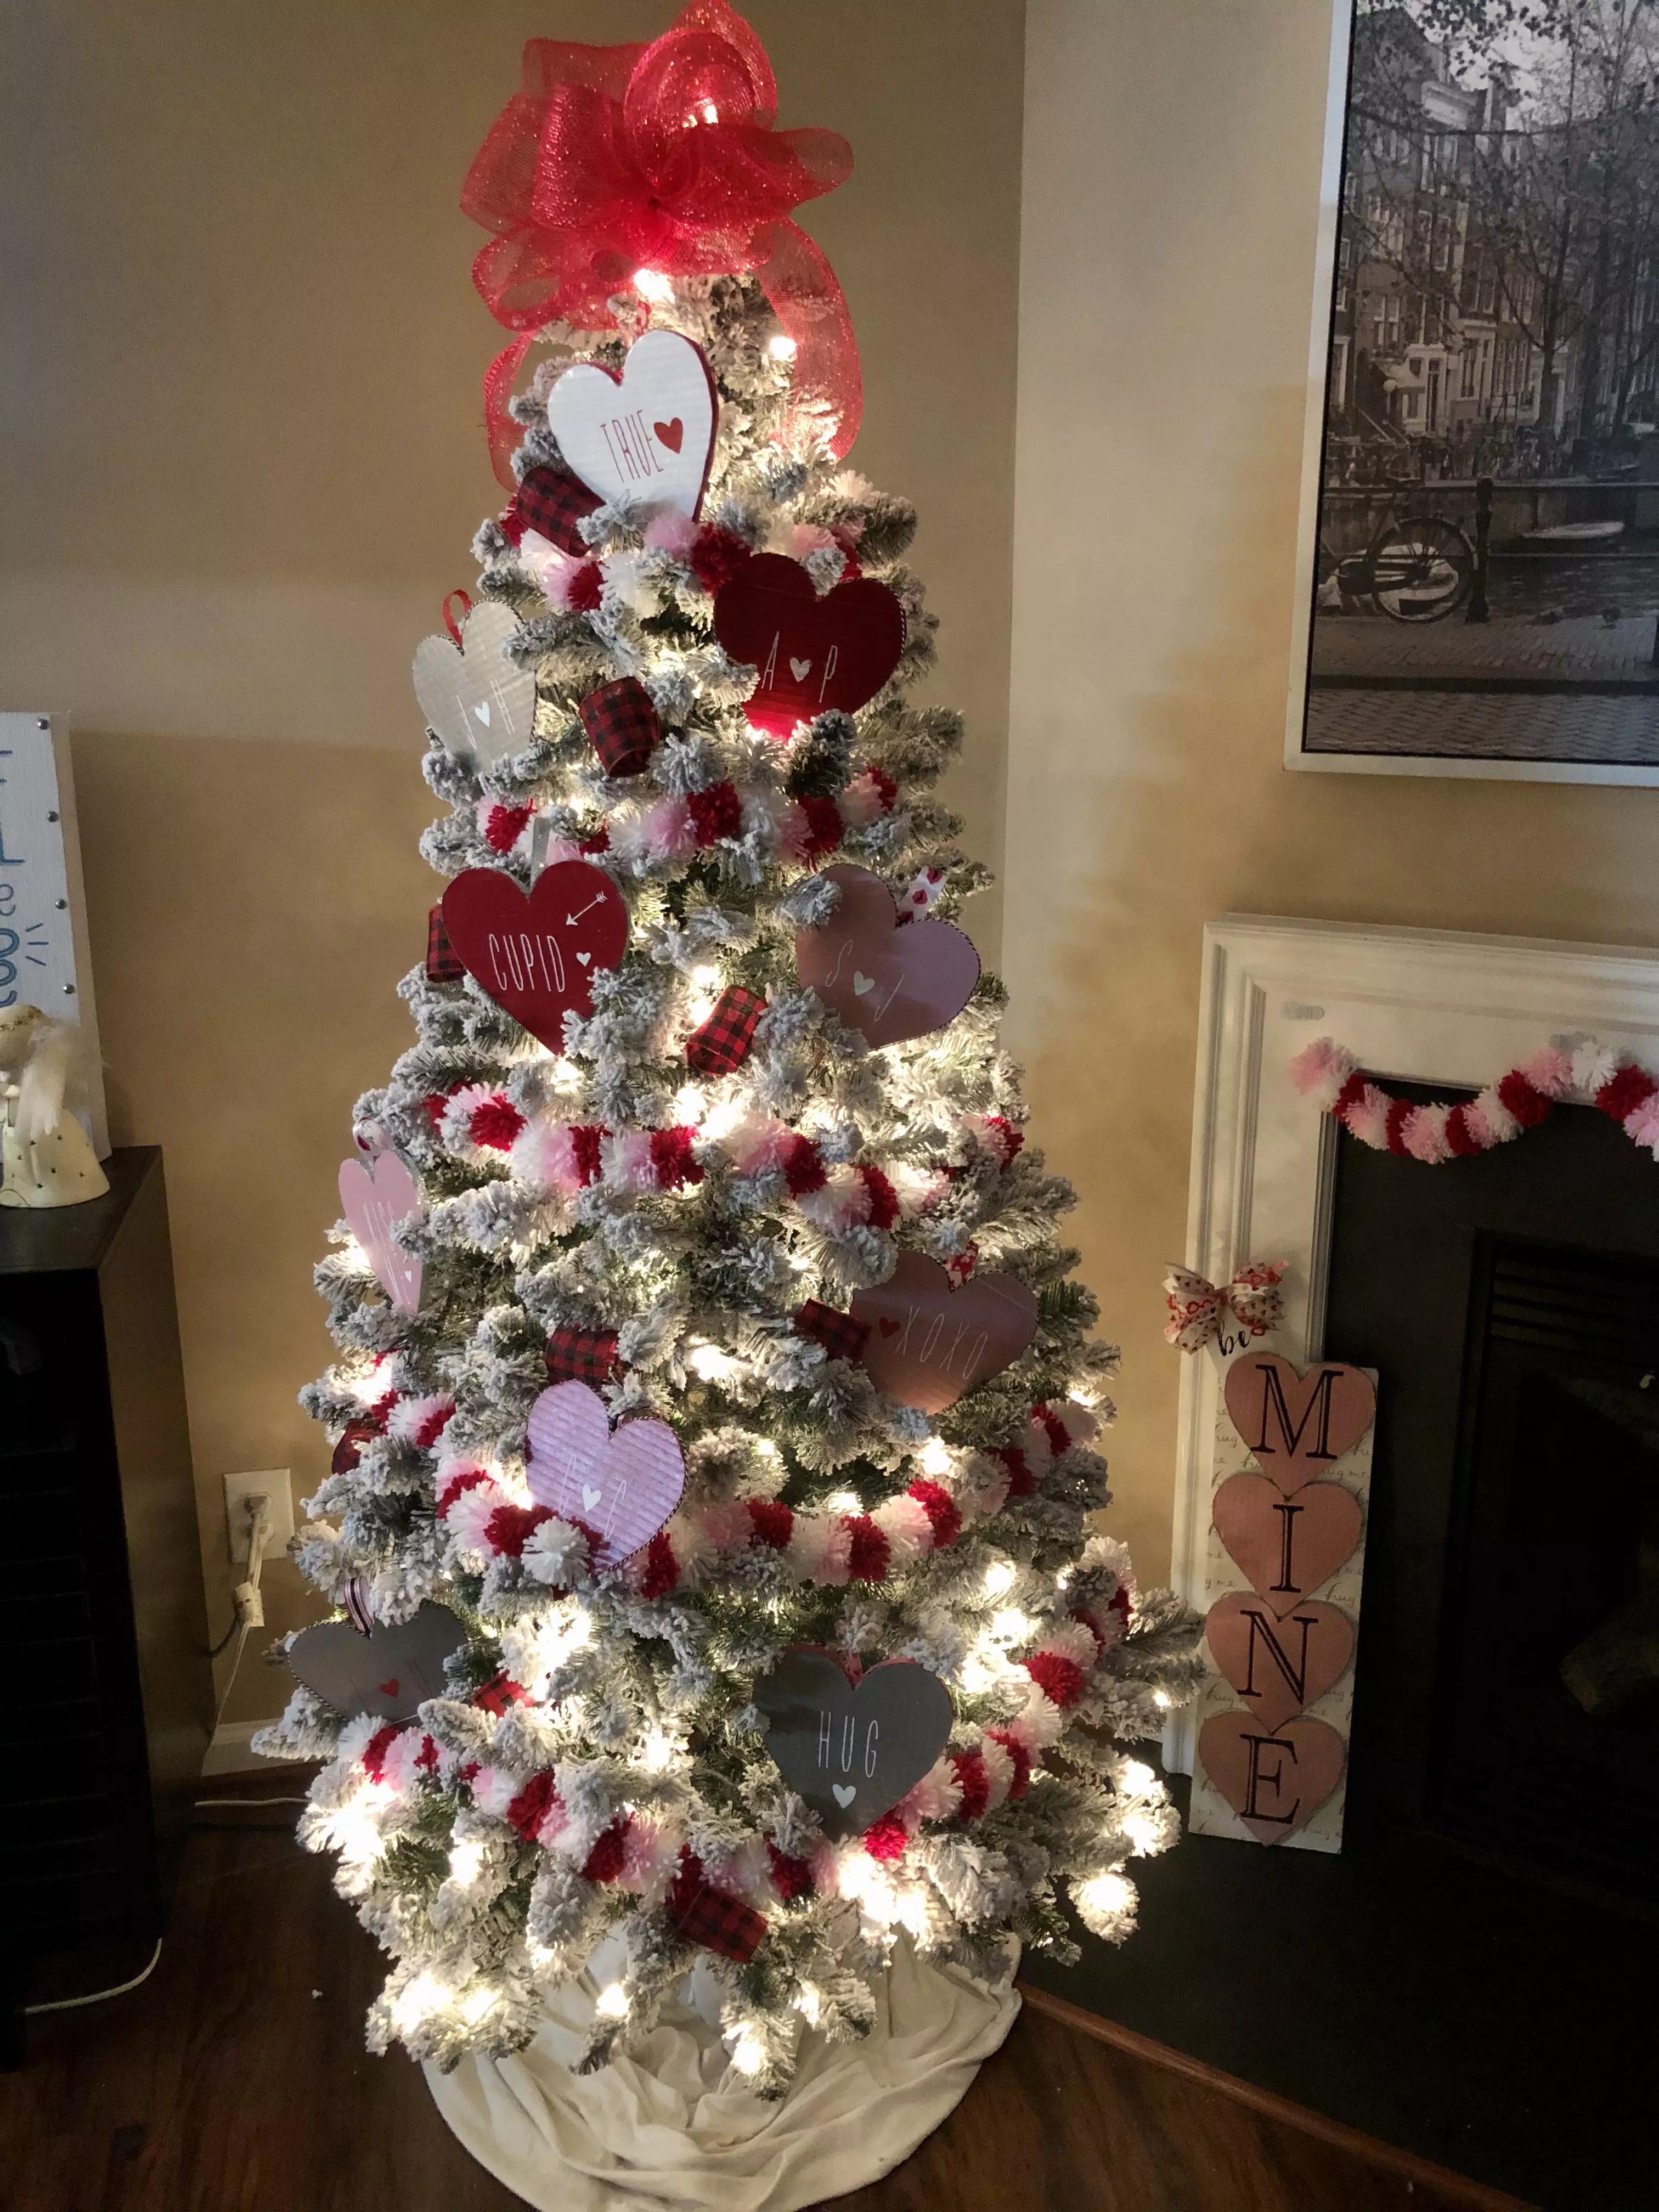 Jady whipped up a garland and cardboard love hearts to make the tree season-appropriate (